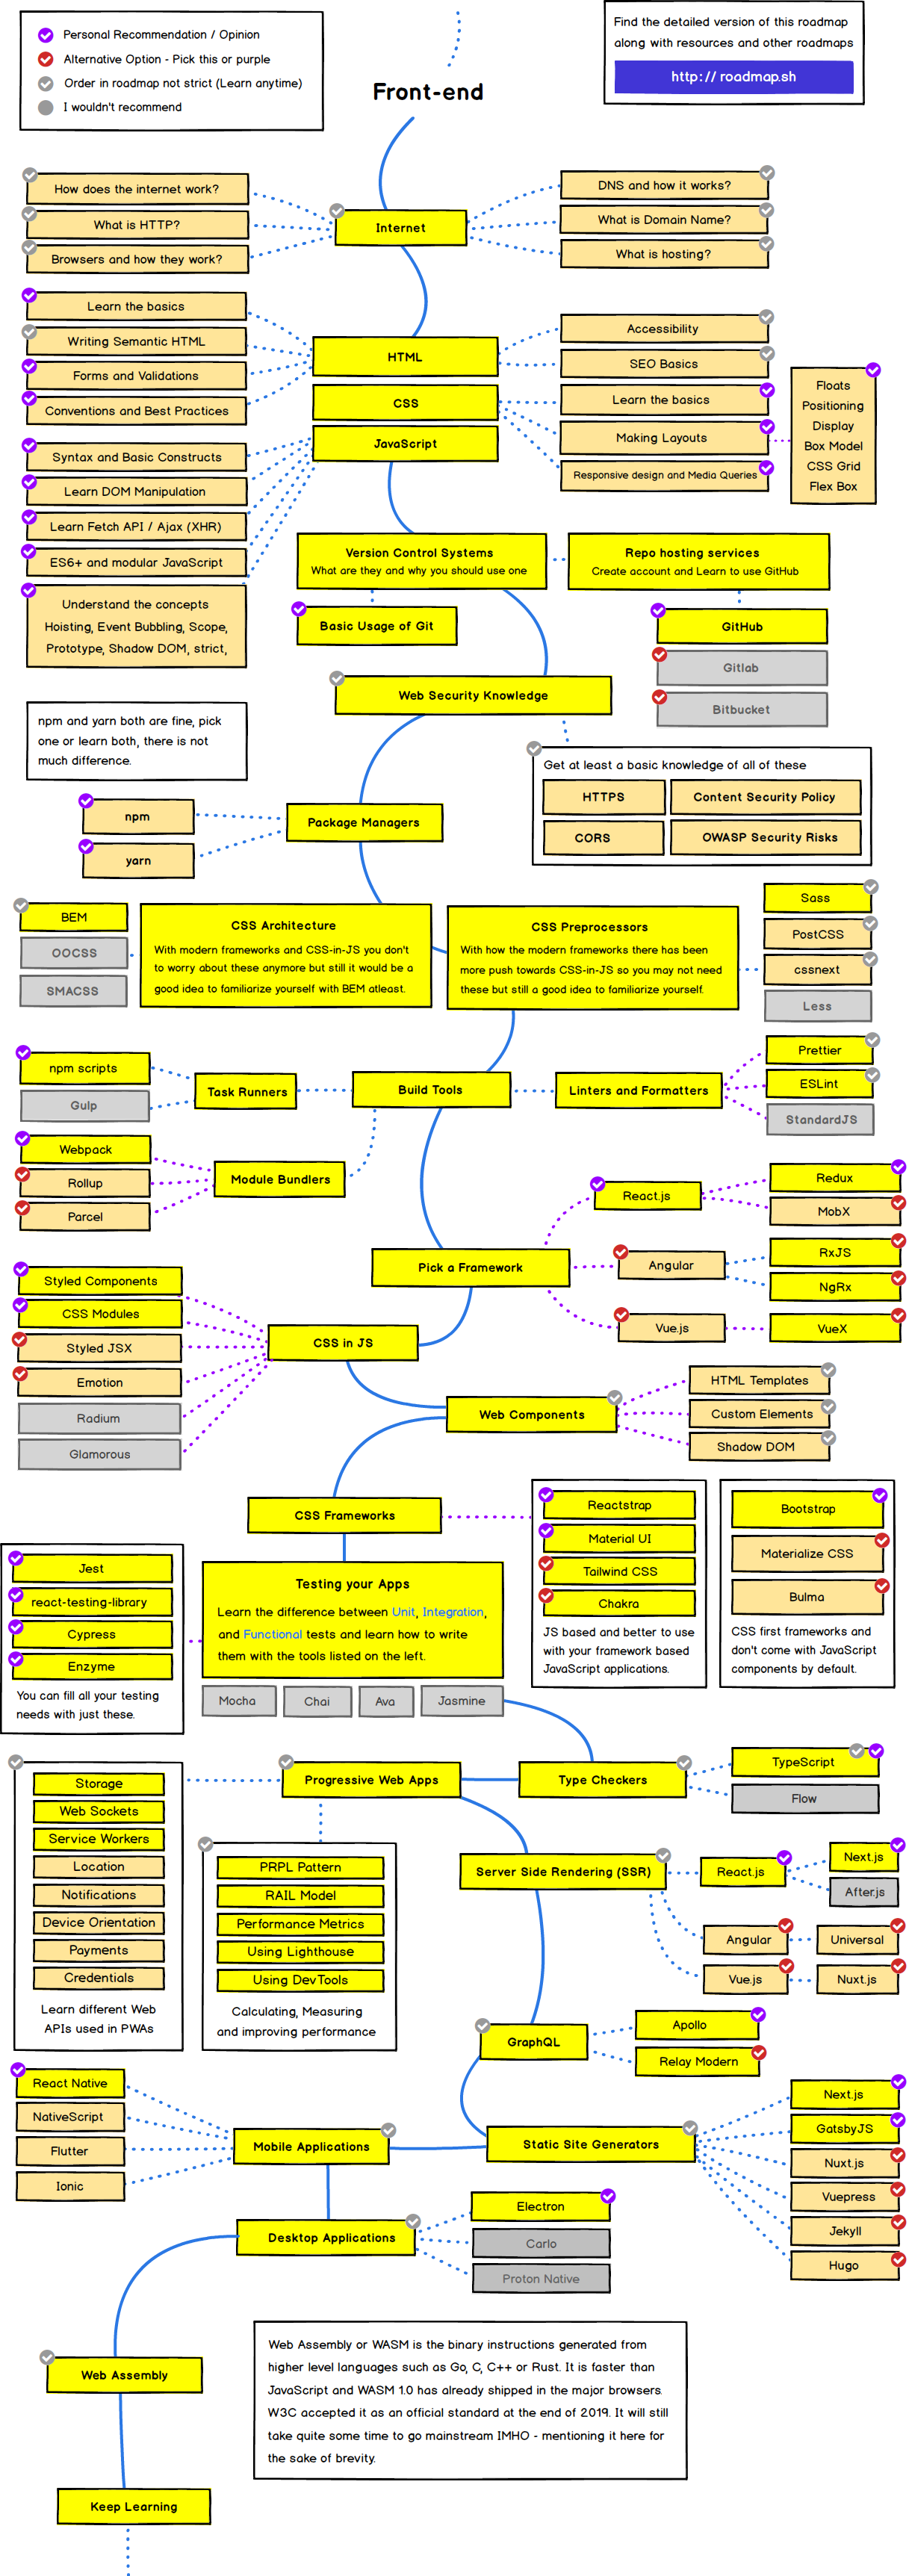 web dev learning path 2020 part2.png